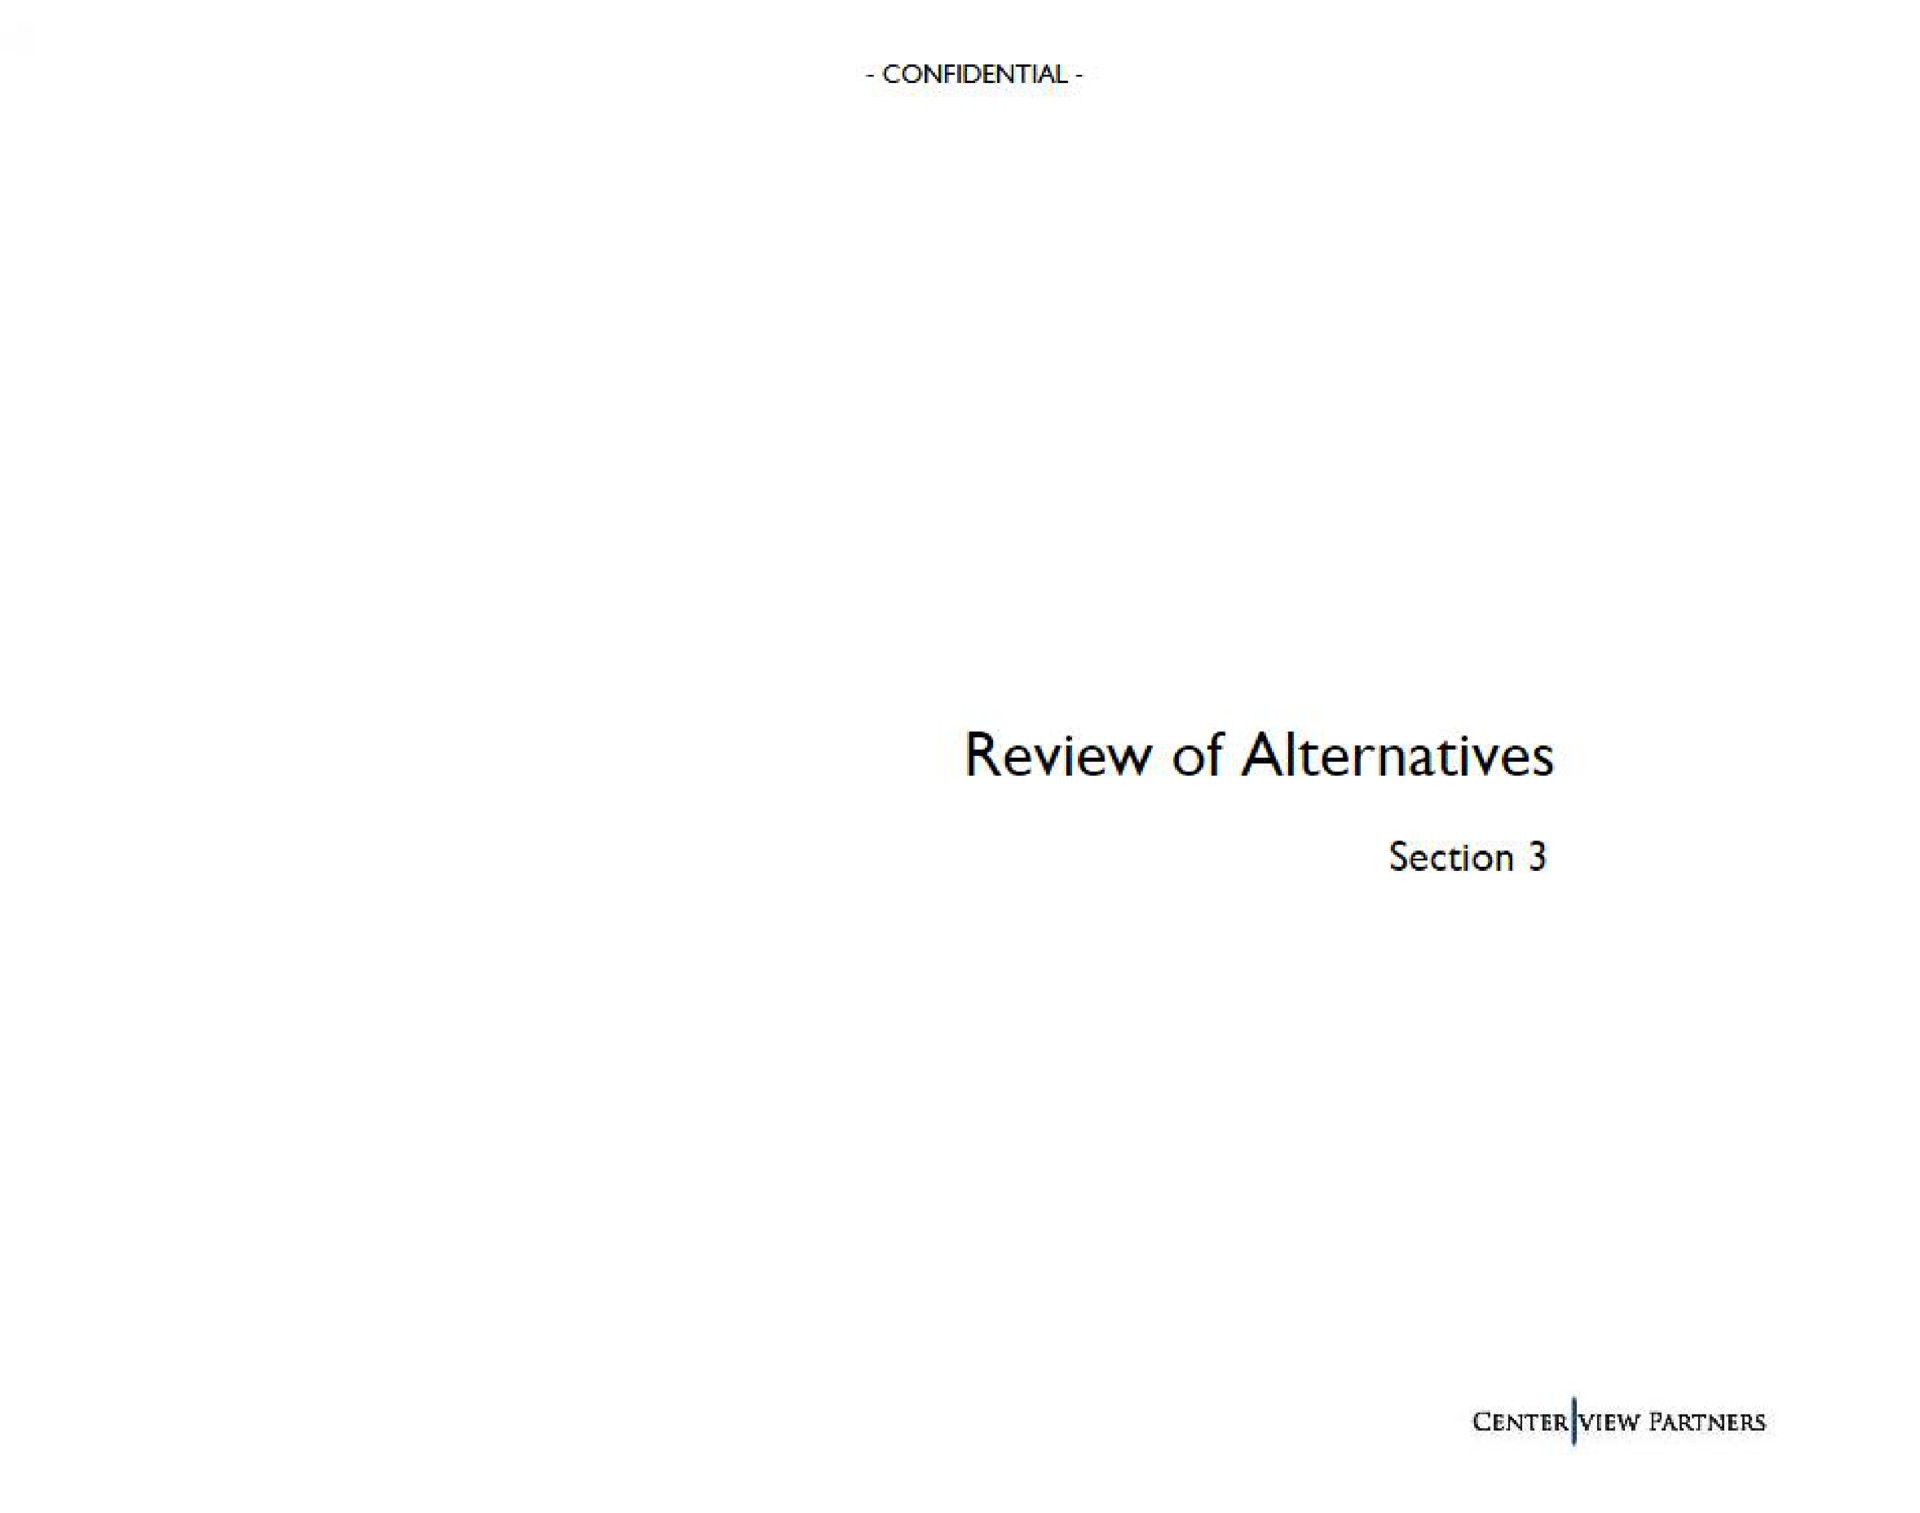 review of alternatives | Centerview Partners